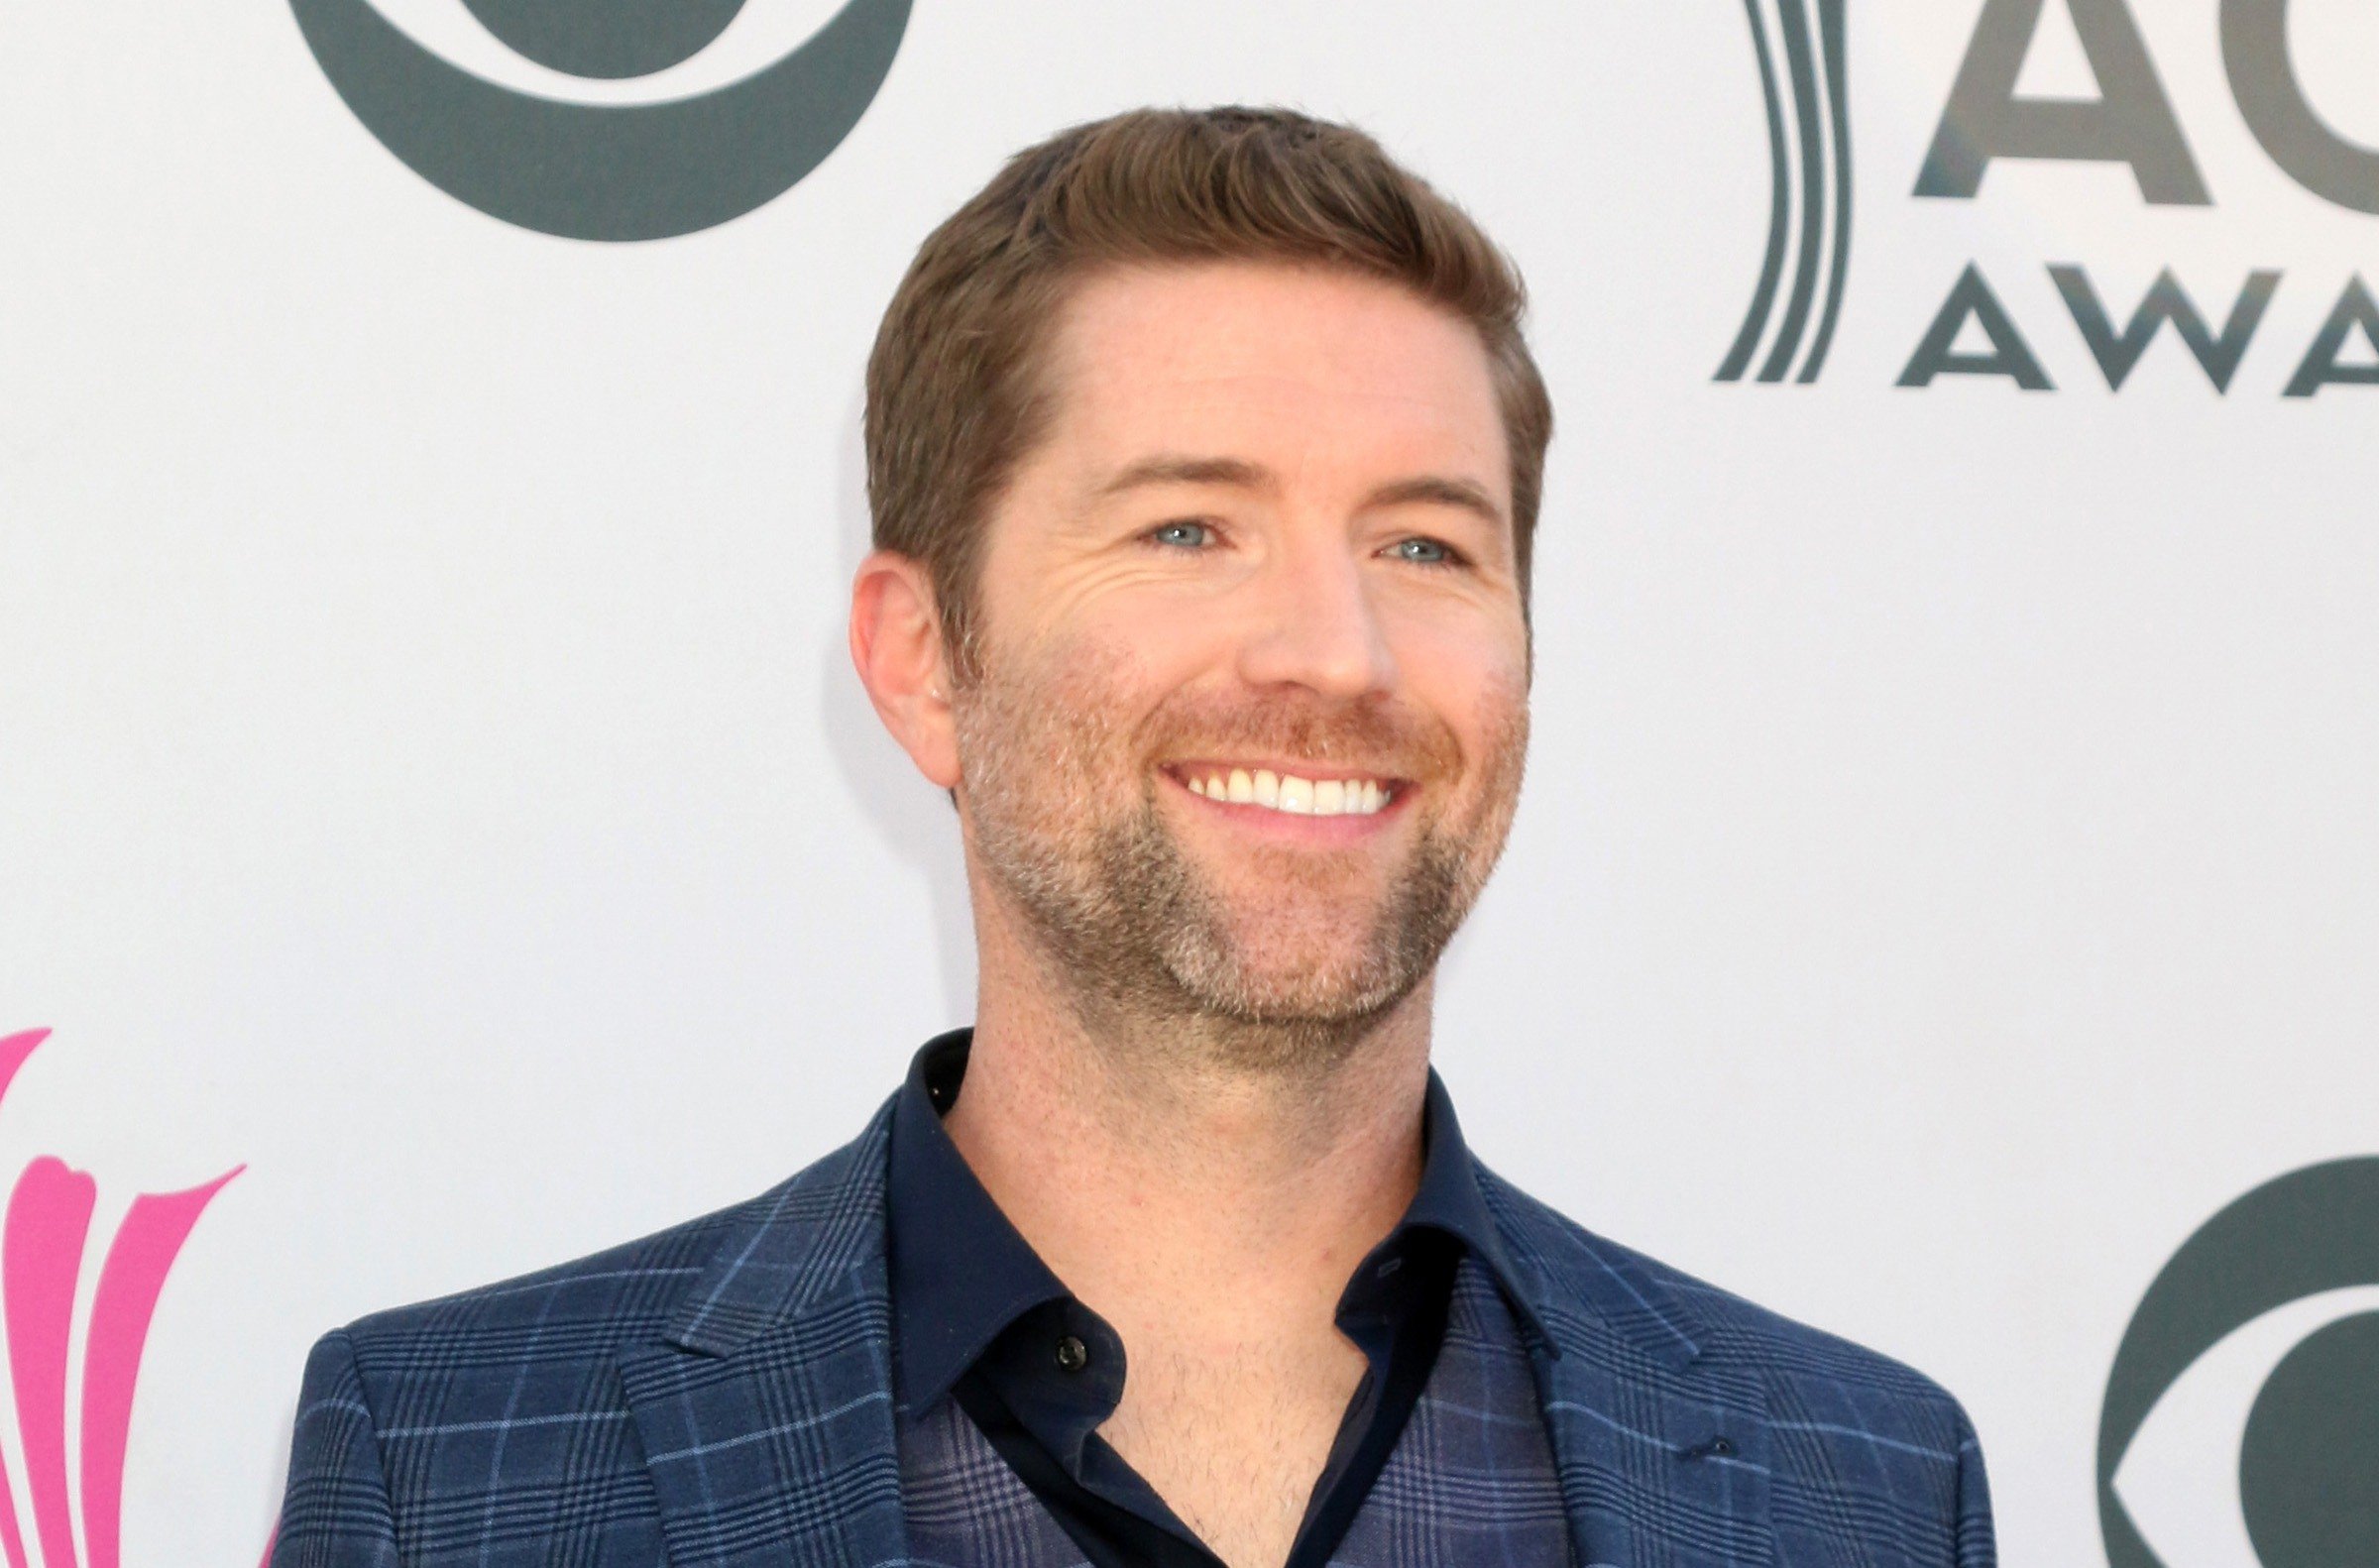 Country singer Josh Turner at the Academy of Country Music Awards in 2017